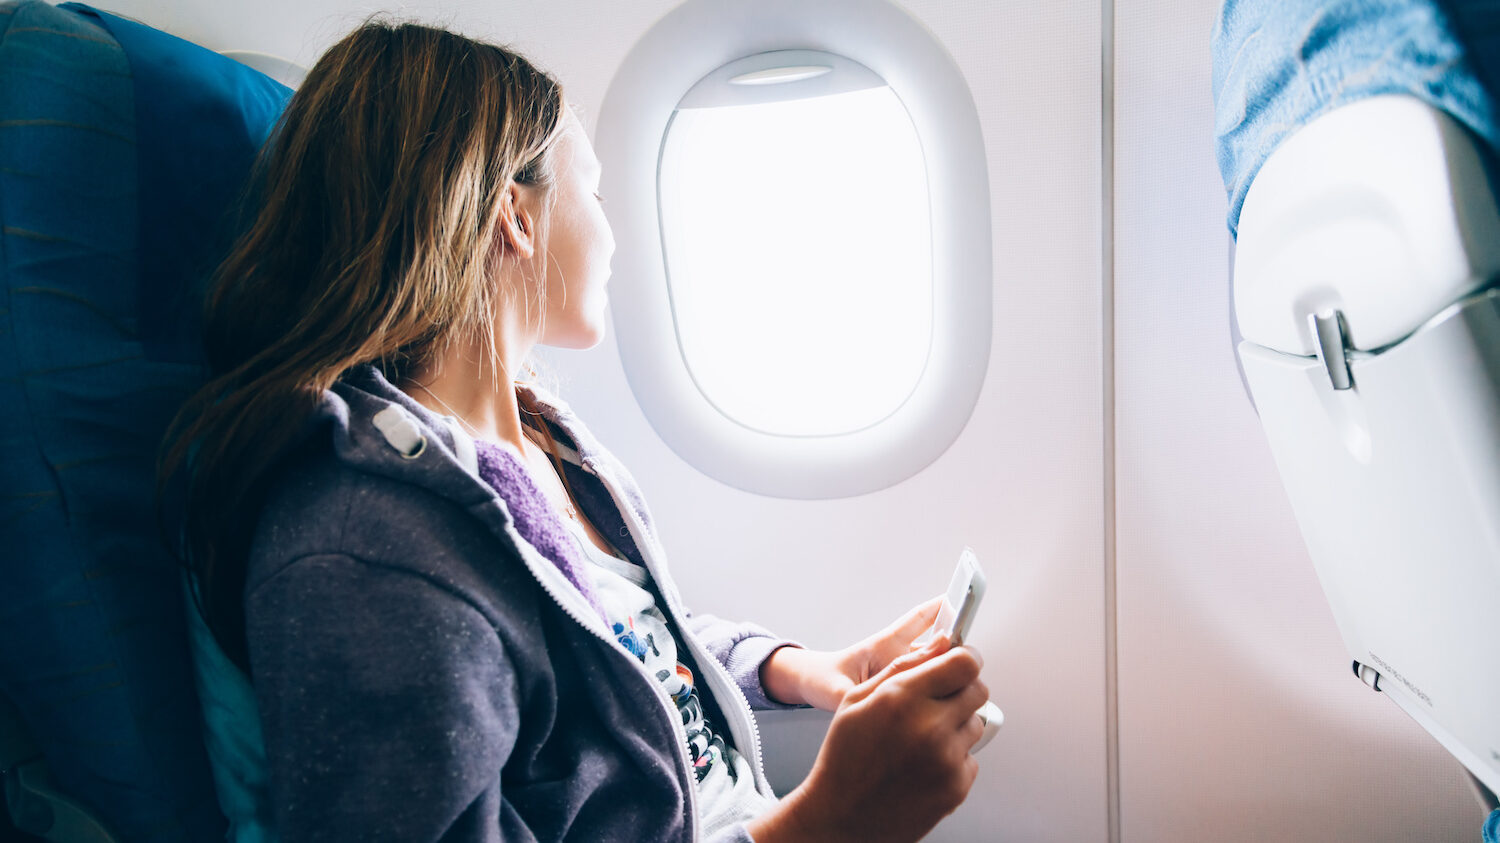 Woman looks out airplane window